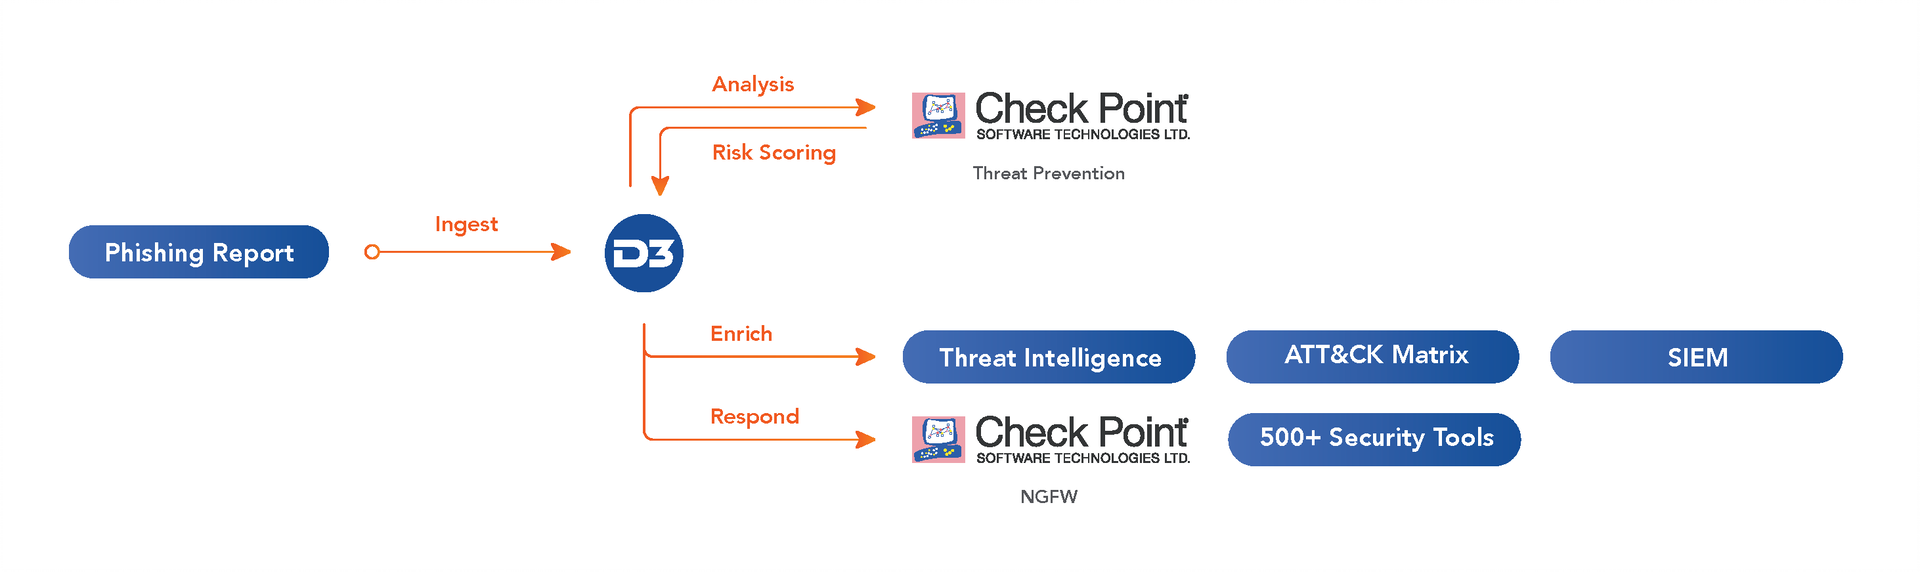 Check Point Integration